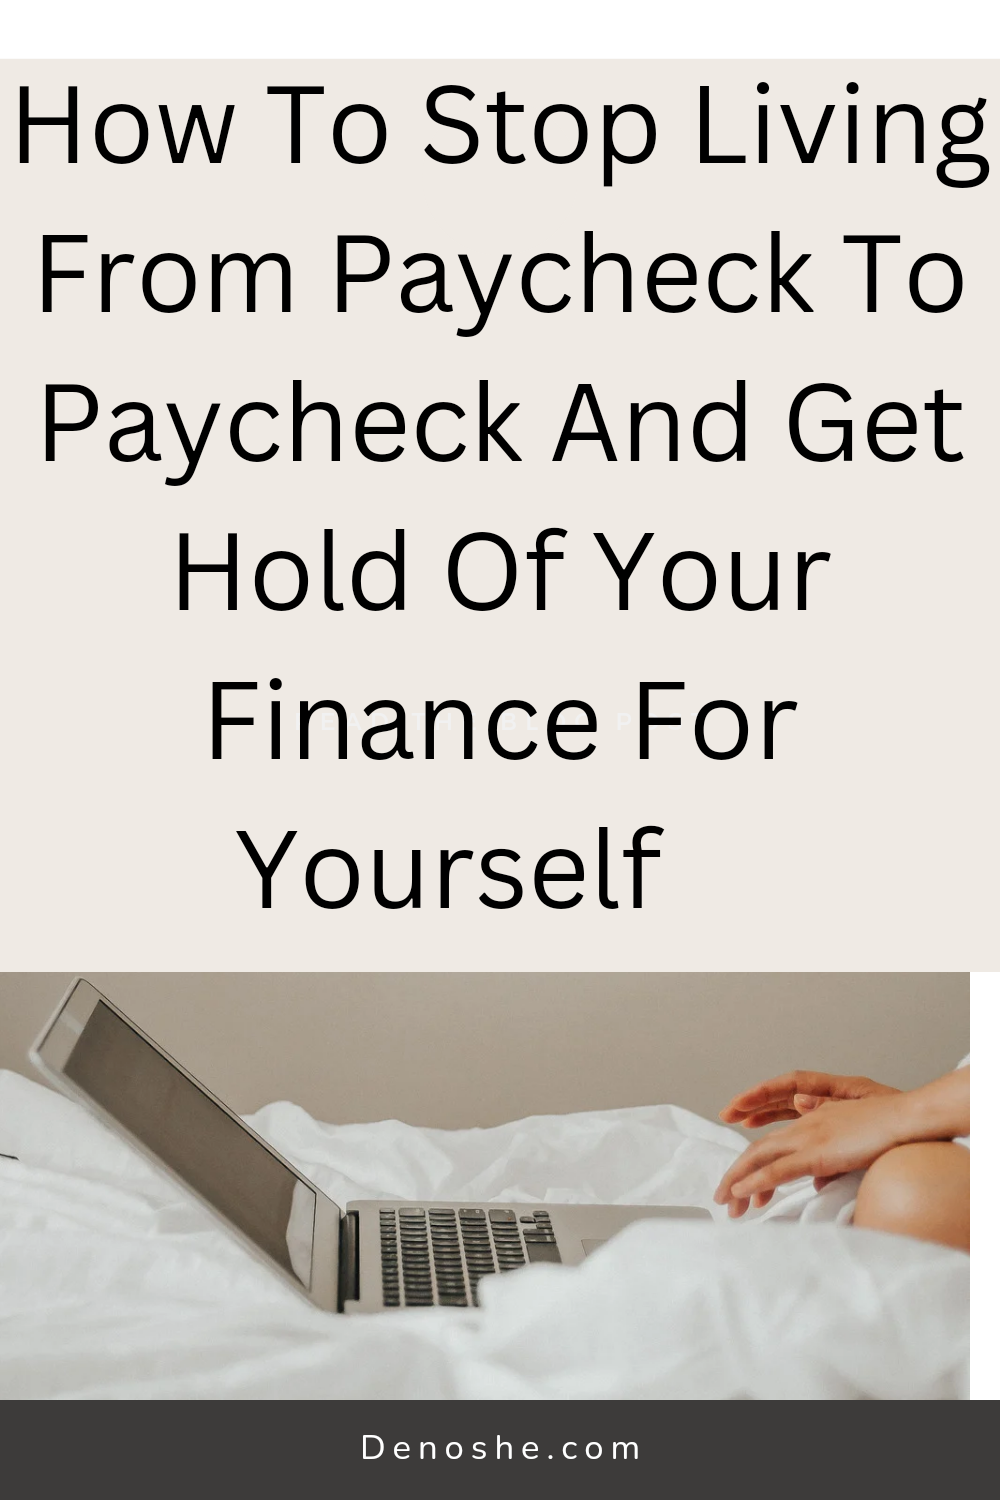 Tips On How To Stop Living From Paycheck To Paycheck.